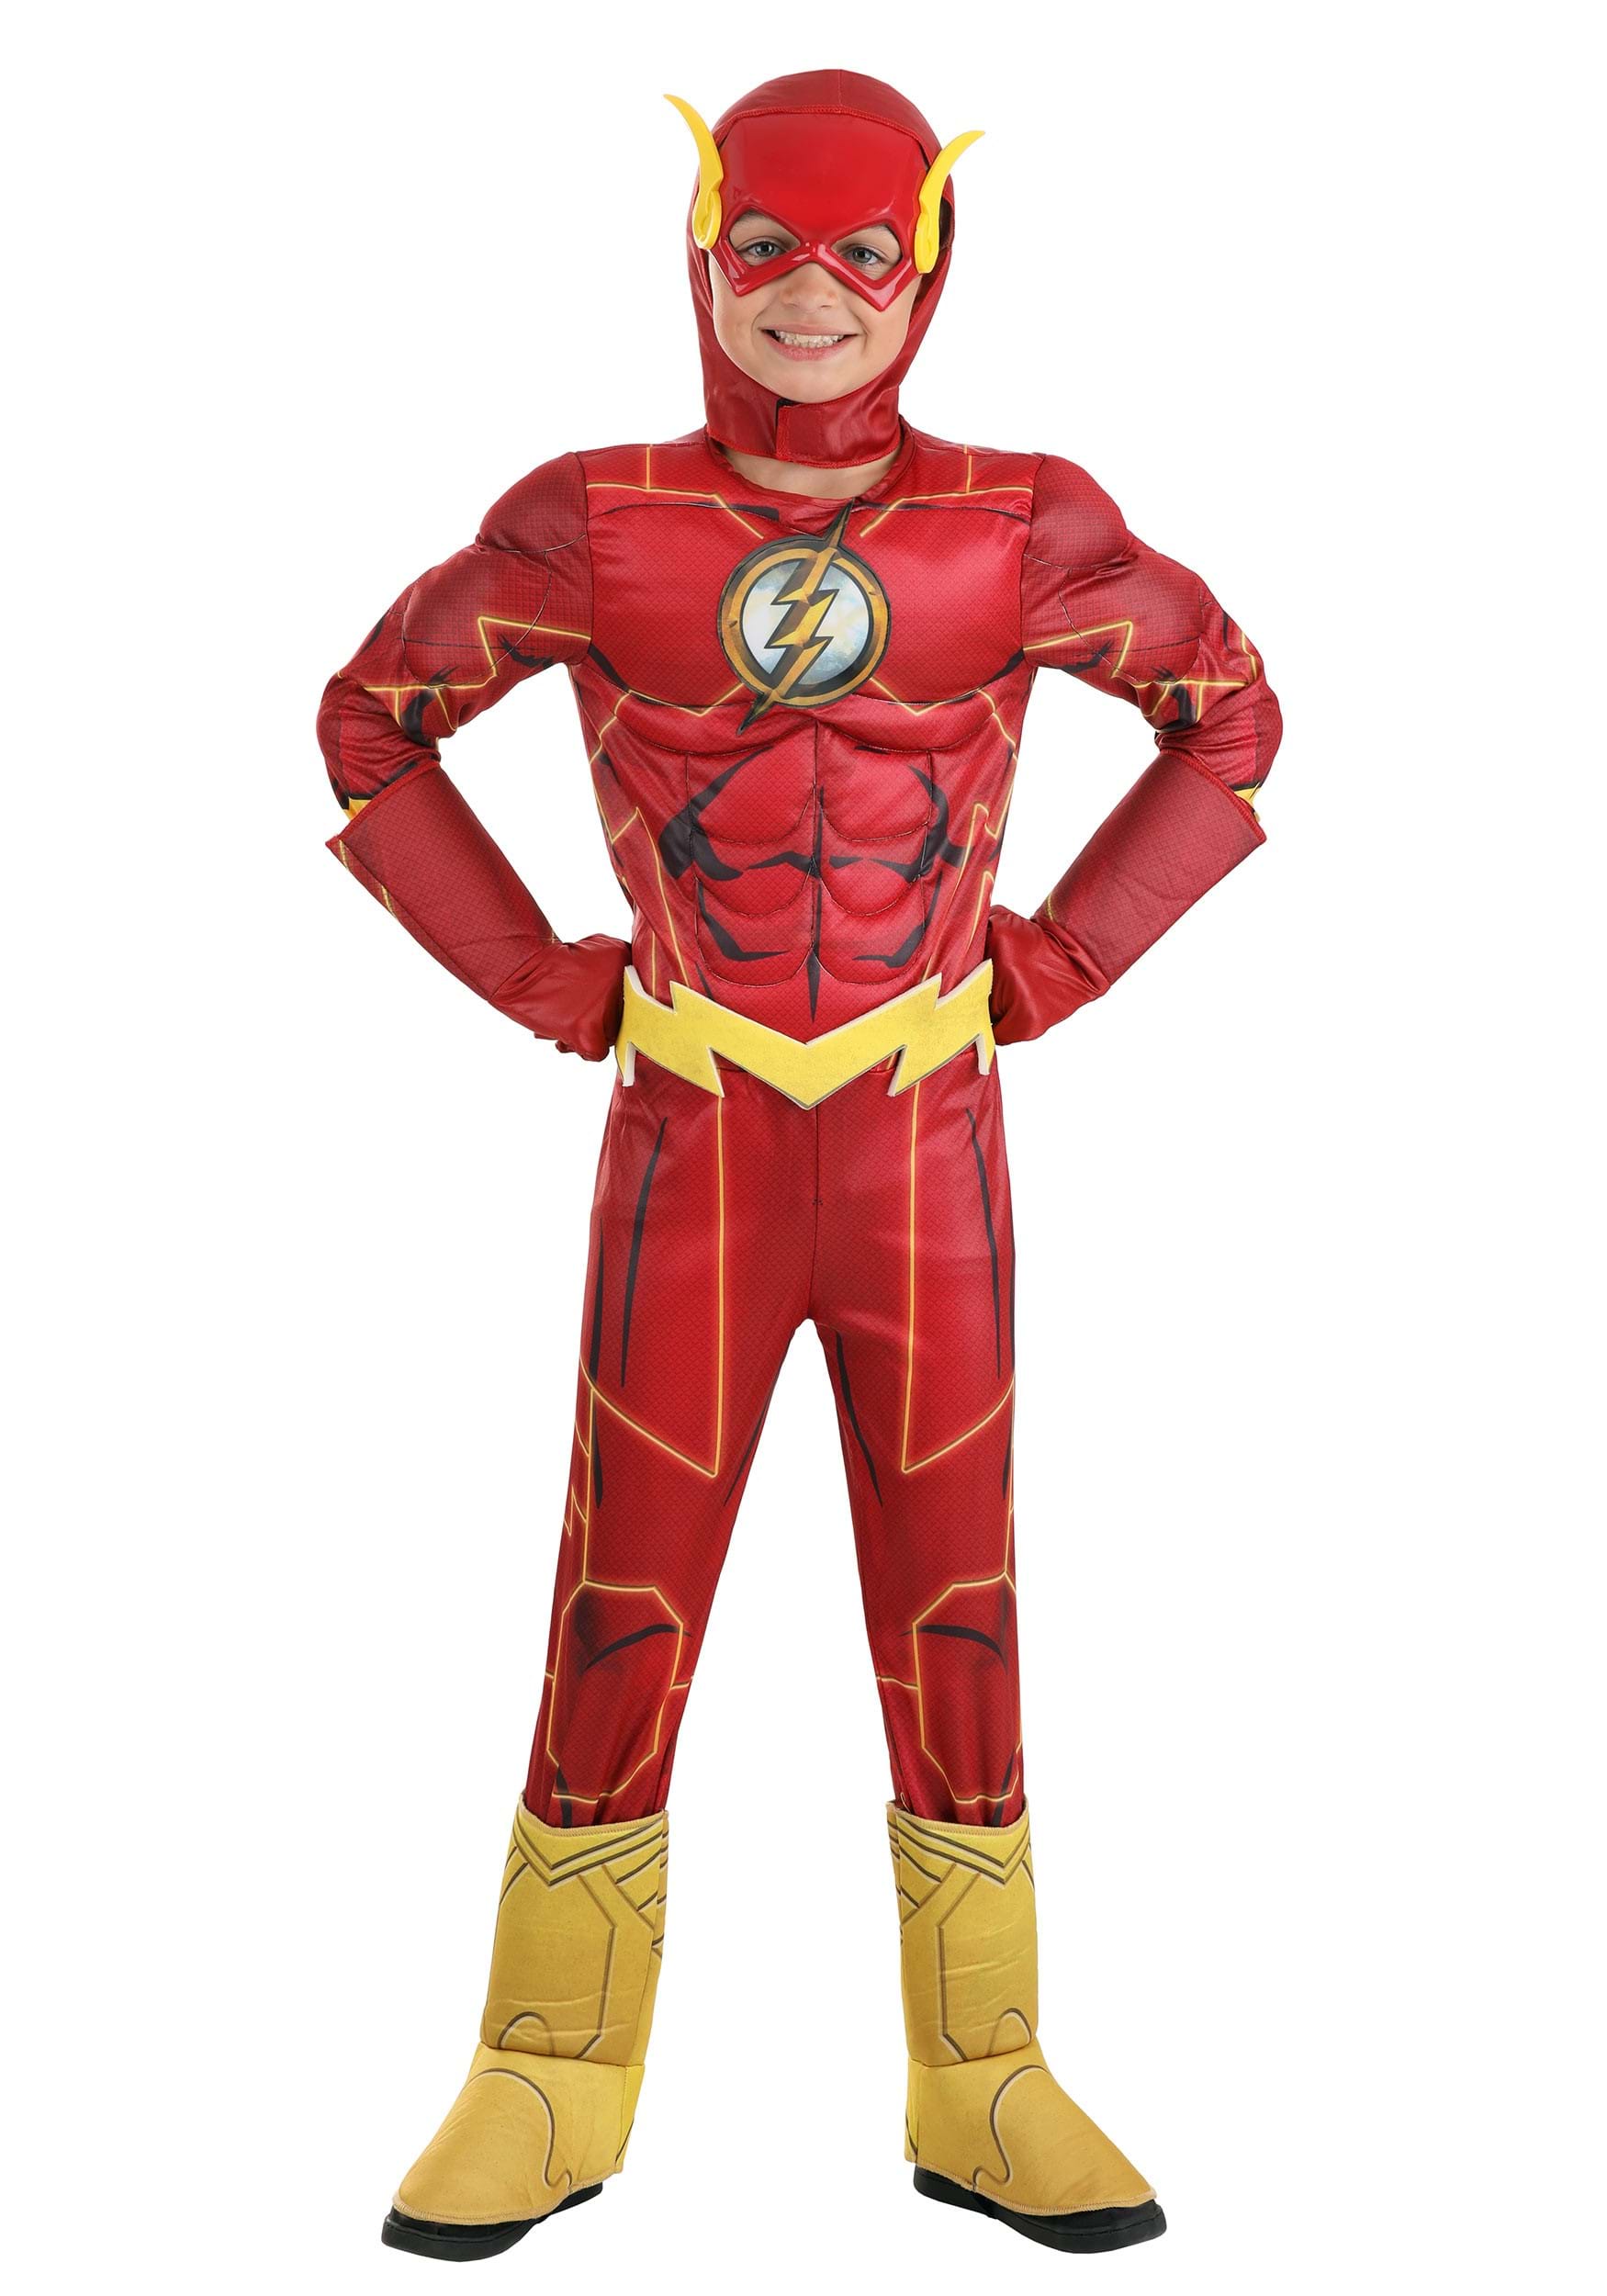 Flash costume for kids